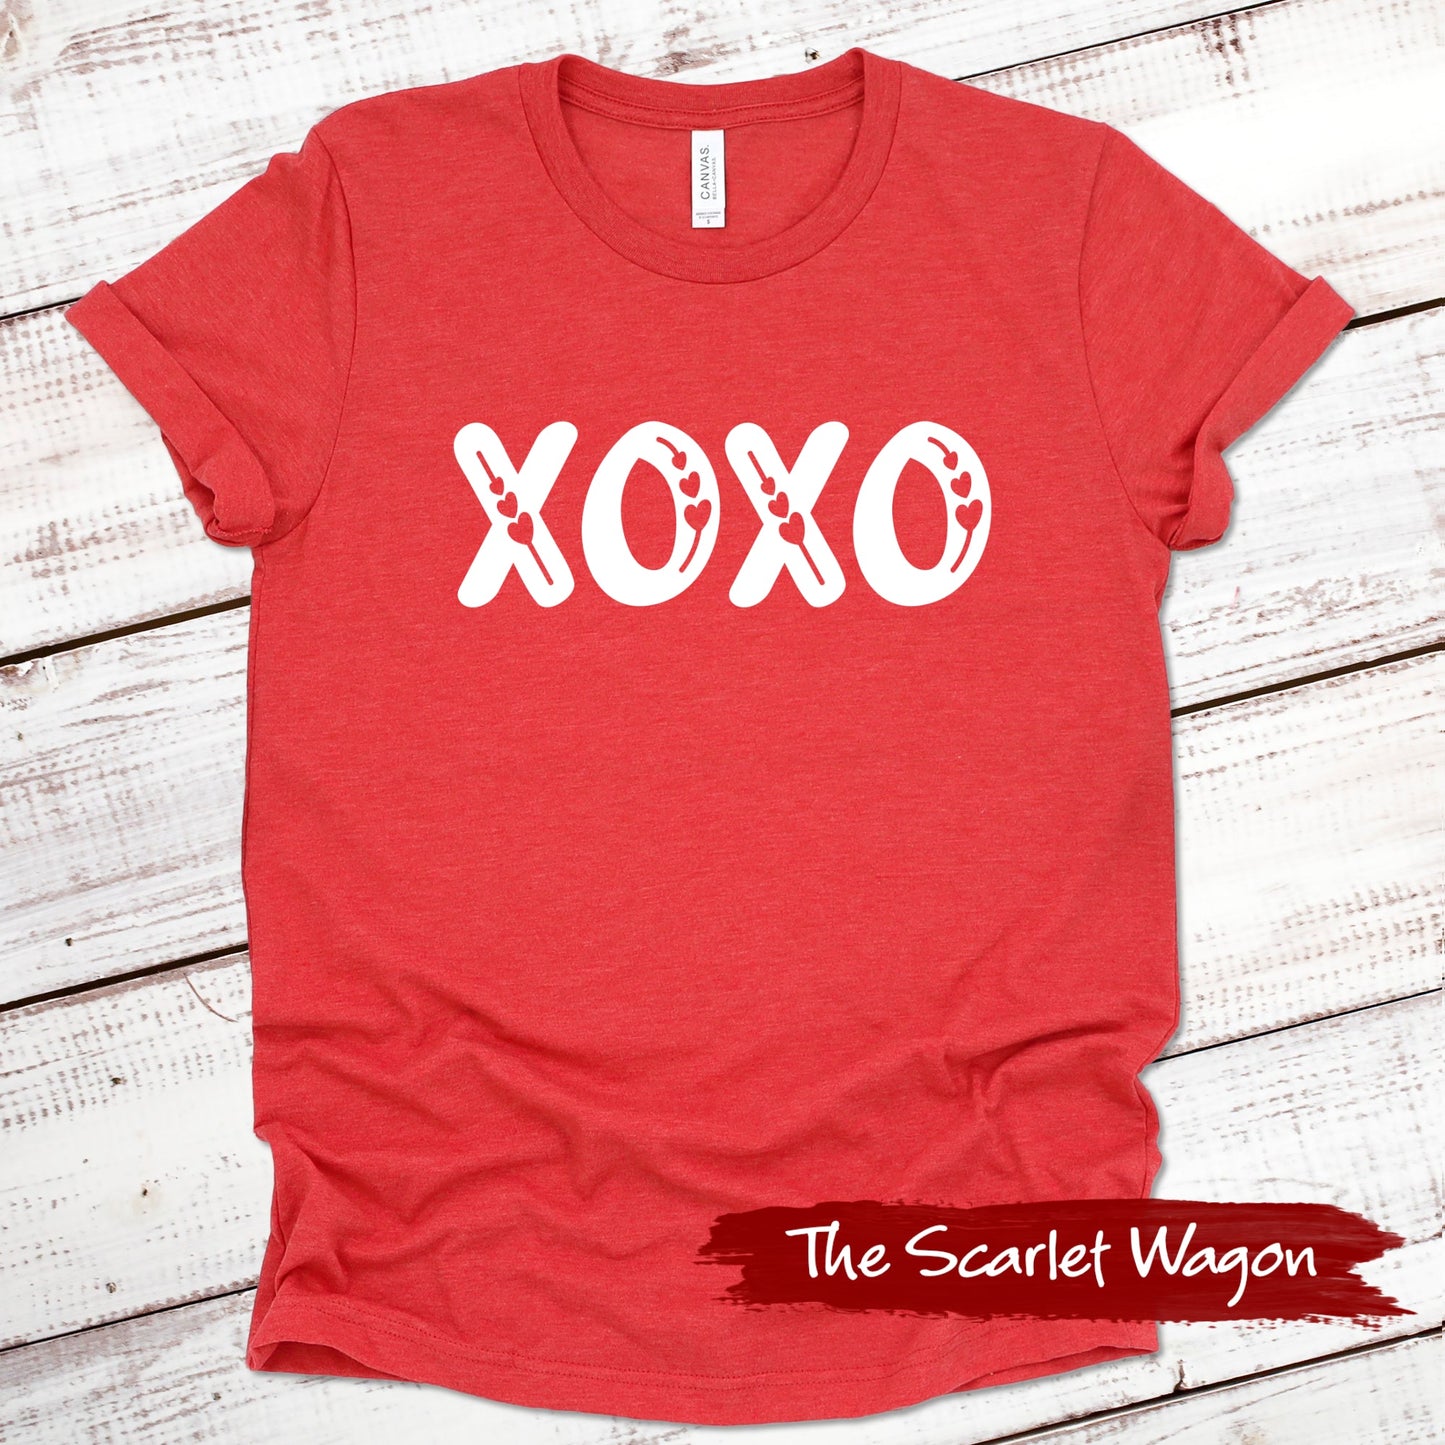 XOXO with Hearts Valentine Shirt Scarlet Wagon Heather Red XS 